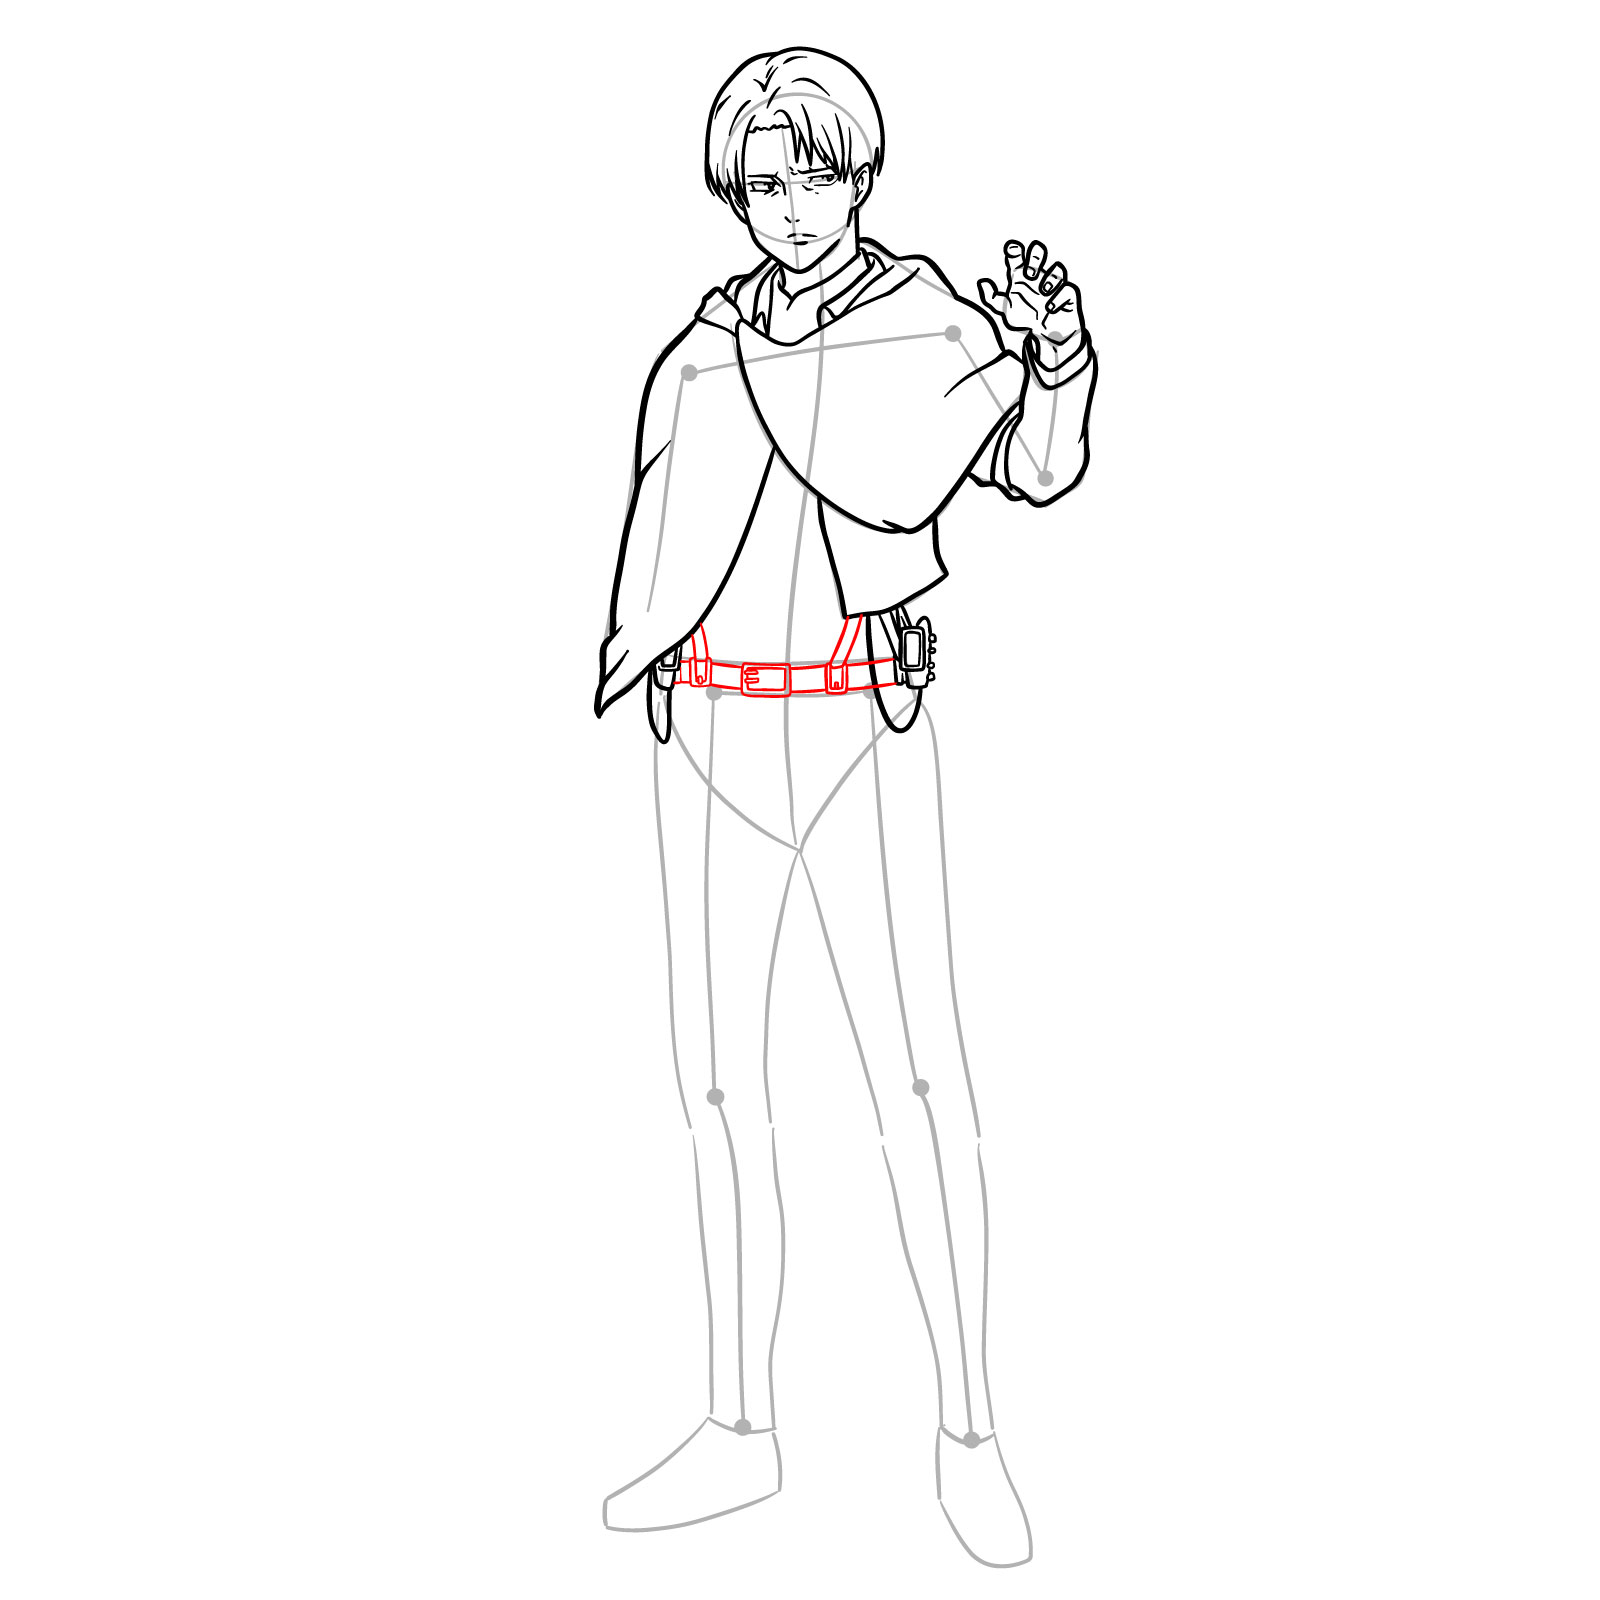 How to draw Captain Levi's jacket and utility belt details in a step-by-step full body drawing guide - step 17